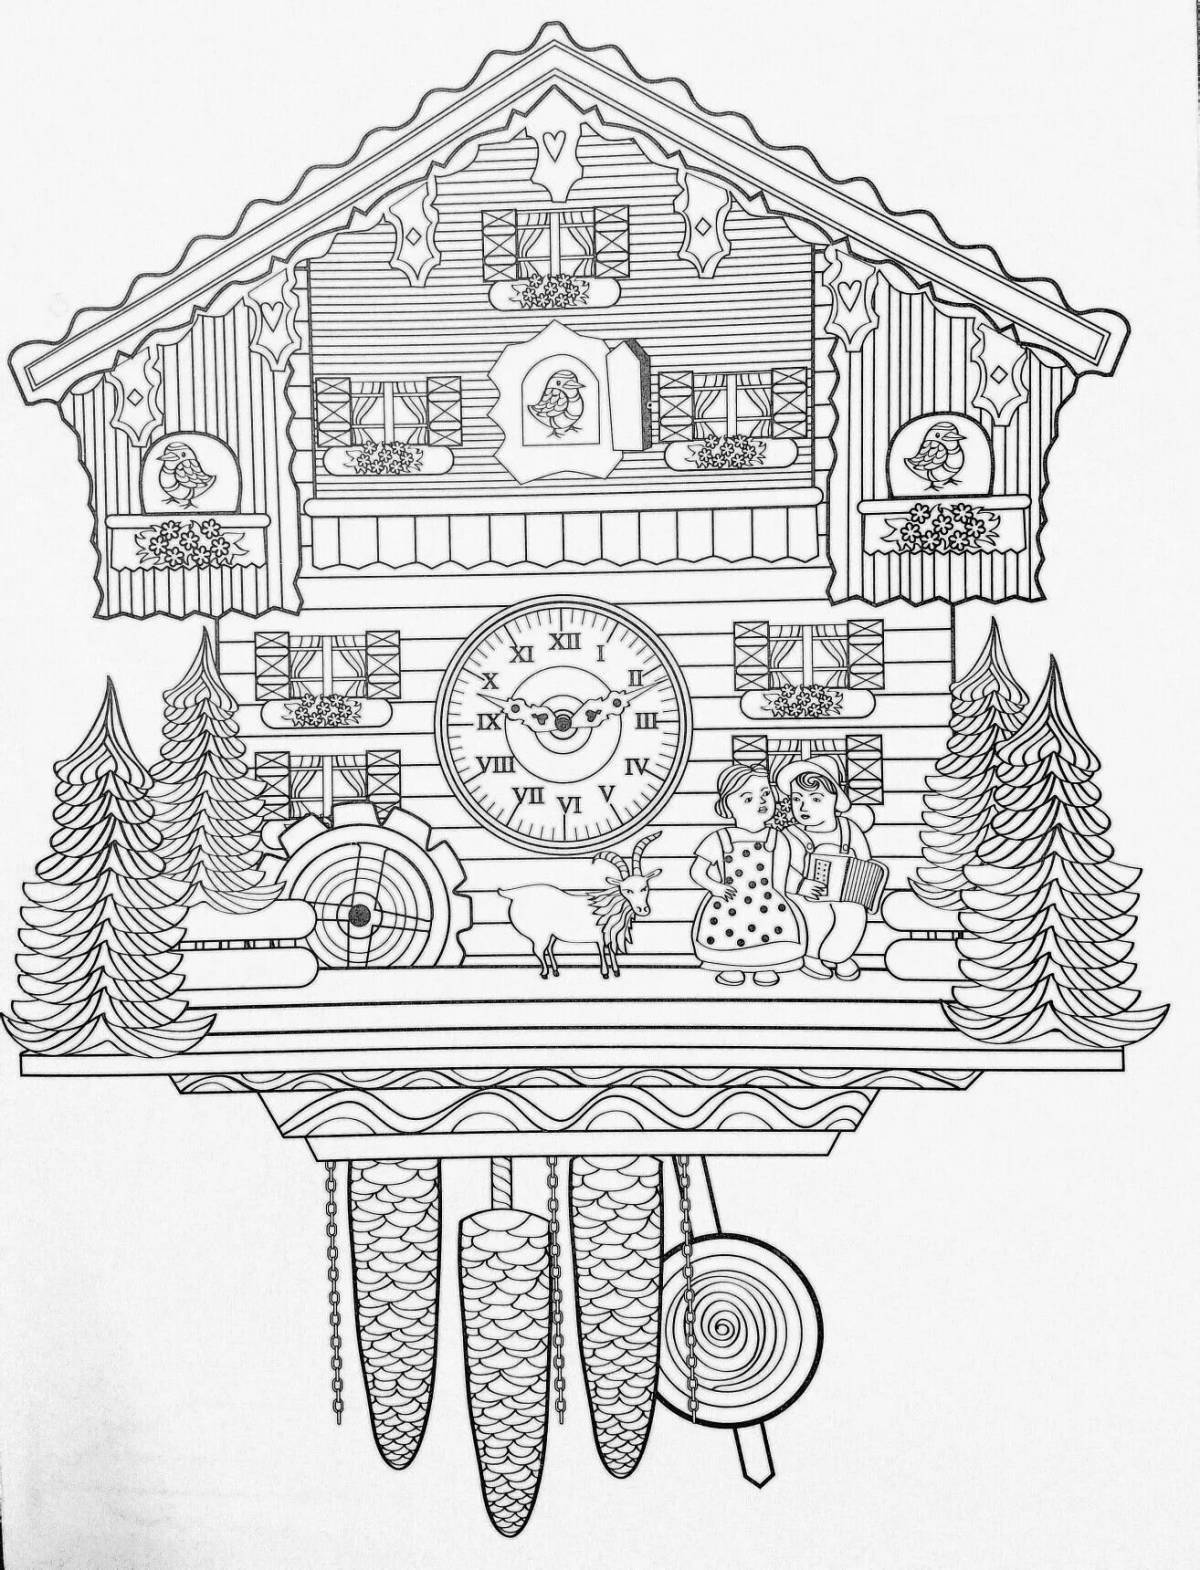 Gorgeous cuckoo clock coloring book